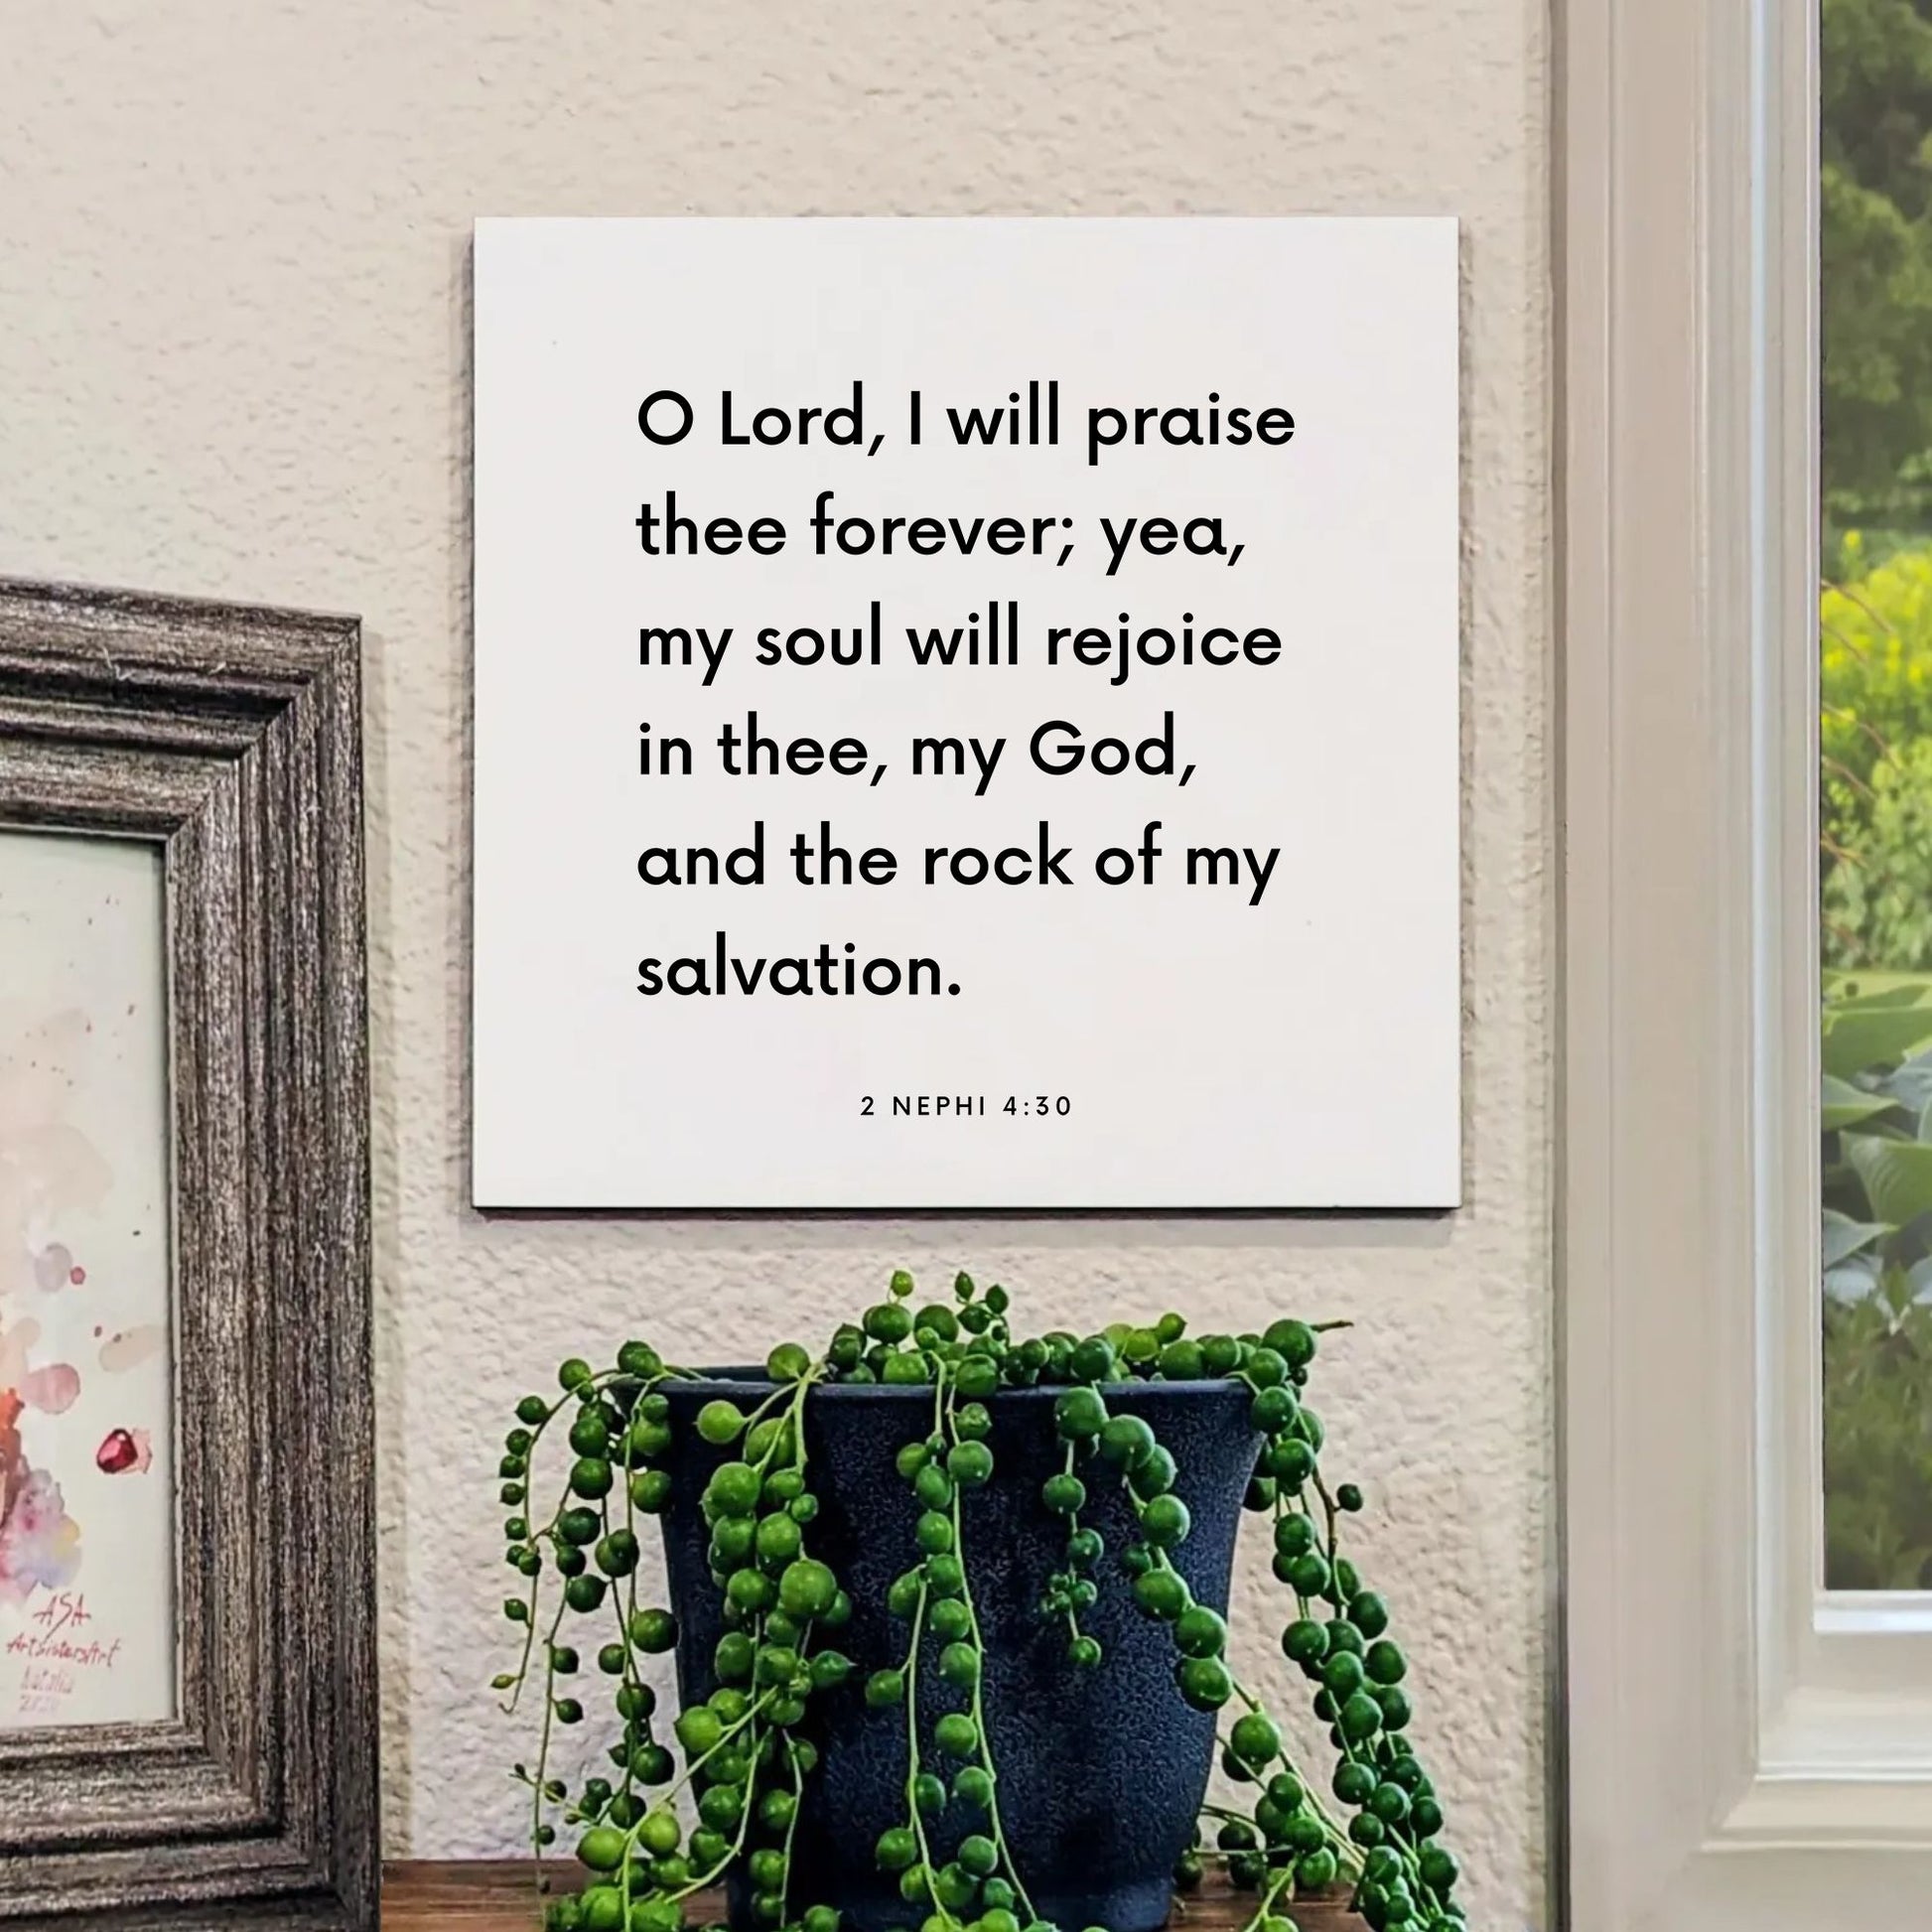 Window mouting of the scripture tile for 2 Nephi 4:30 - "Lord, I will praise thee forever"